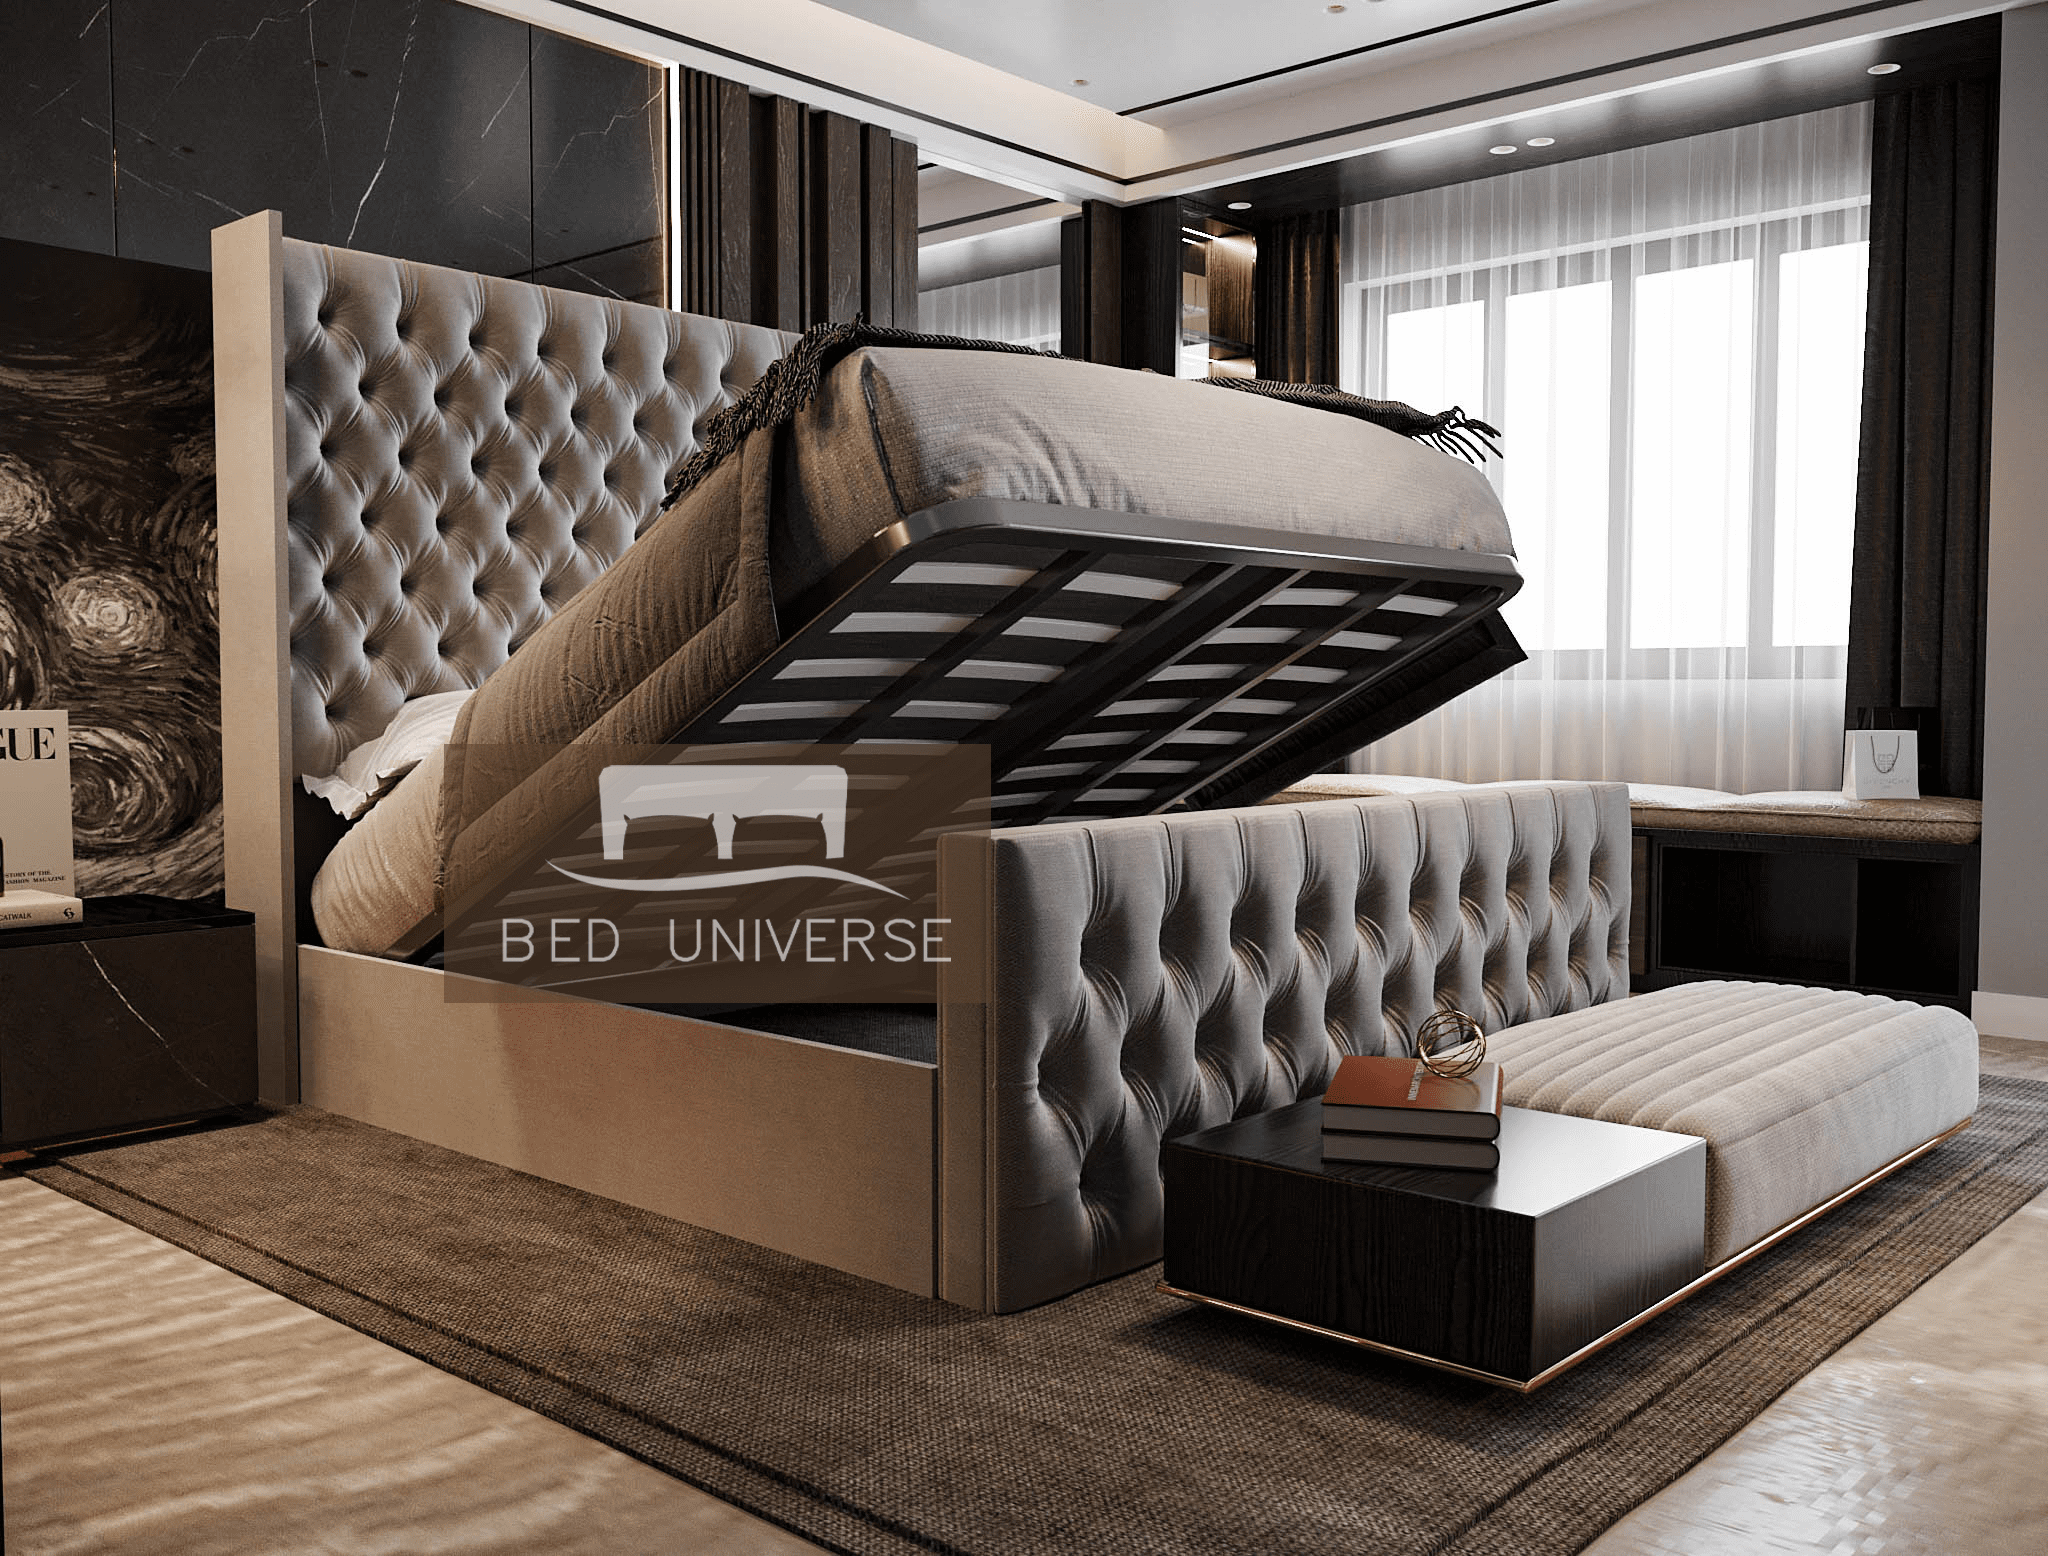 Elle Chesterfield Upholstered Winged Bed Frame, Winged Bed, Chesterfield Bed, Upholstered Bed, Fabric Bed, Grey Bed, Sotrage bed, Gas Lift Bed, Underbed storage